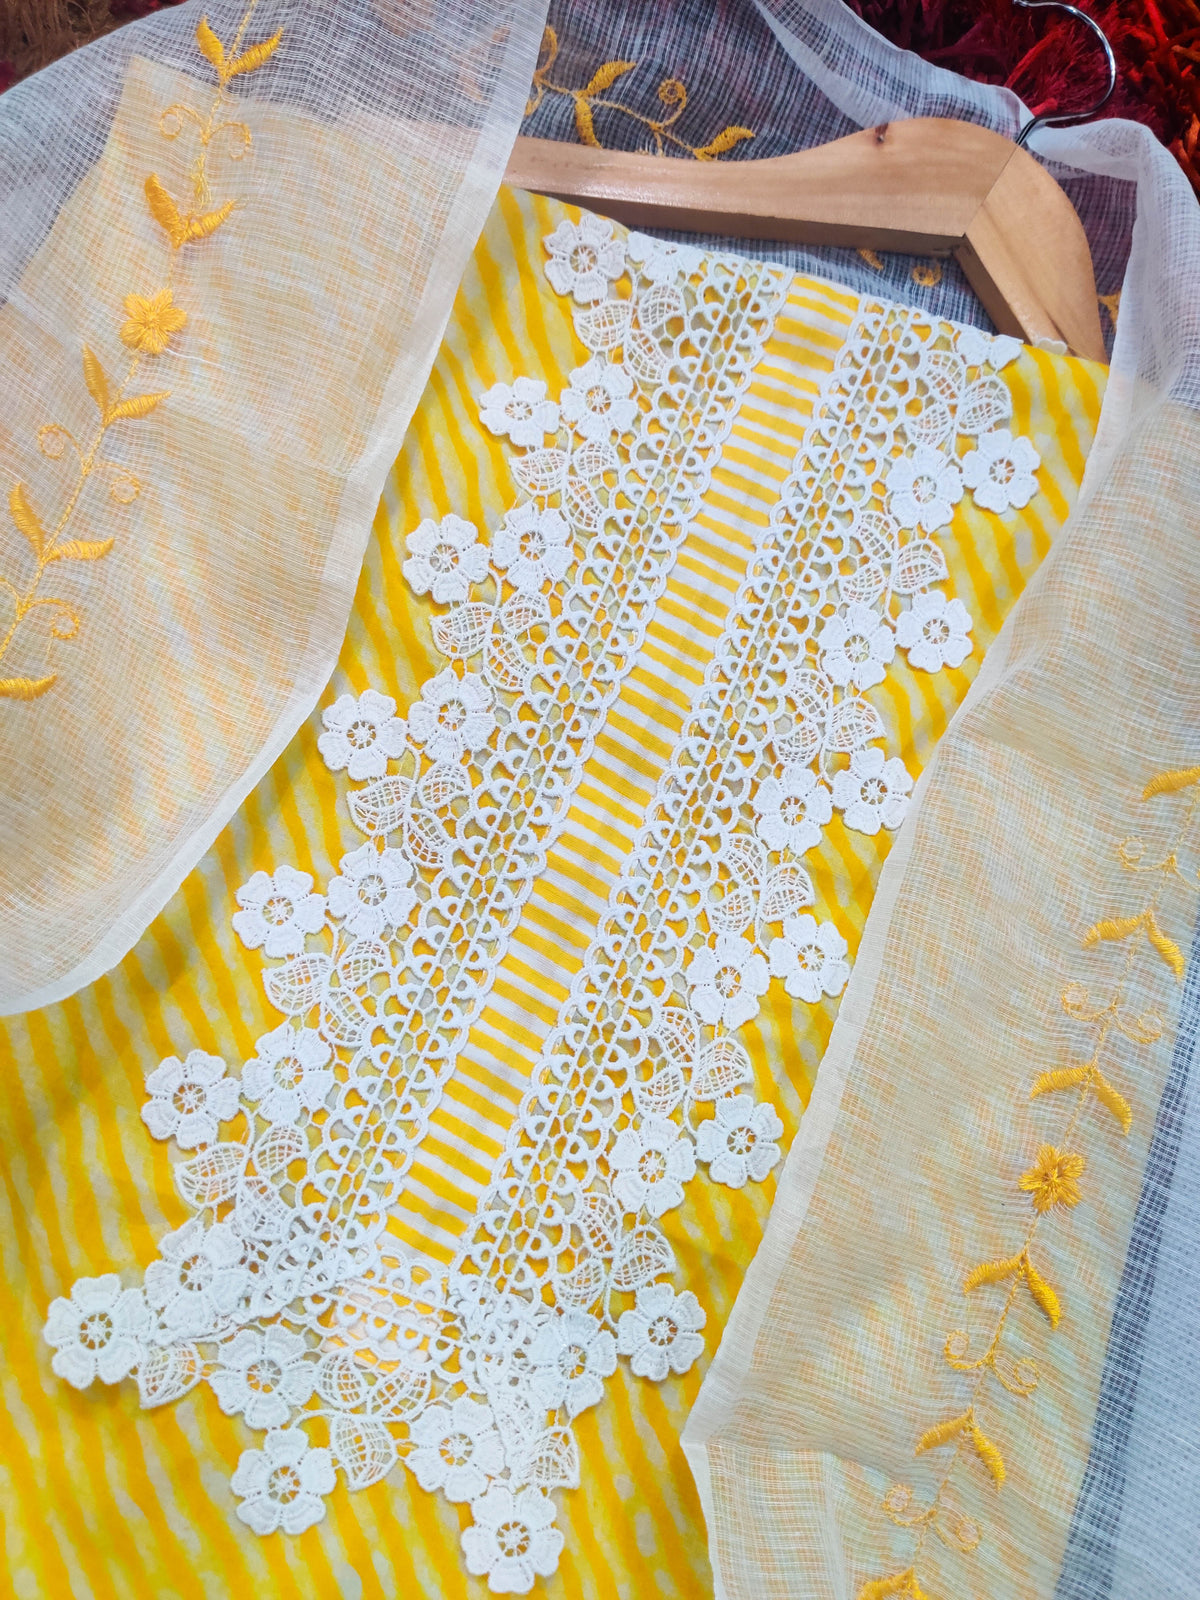 Yellow Striped Suit Accentuated with White Lace Detailing Cotton Unstitched Dress Material Suit Set